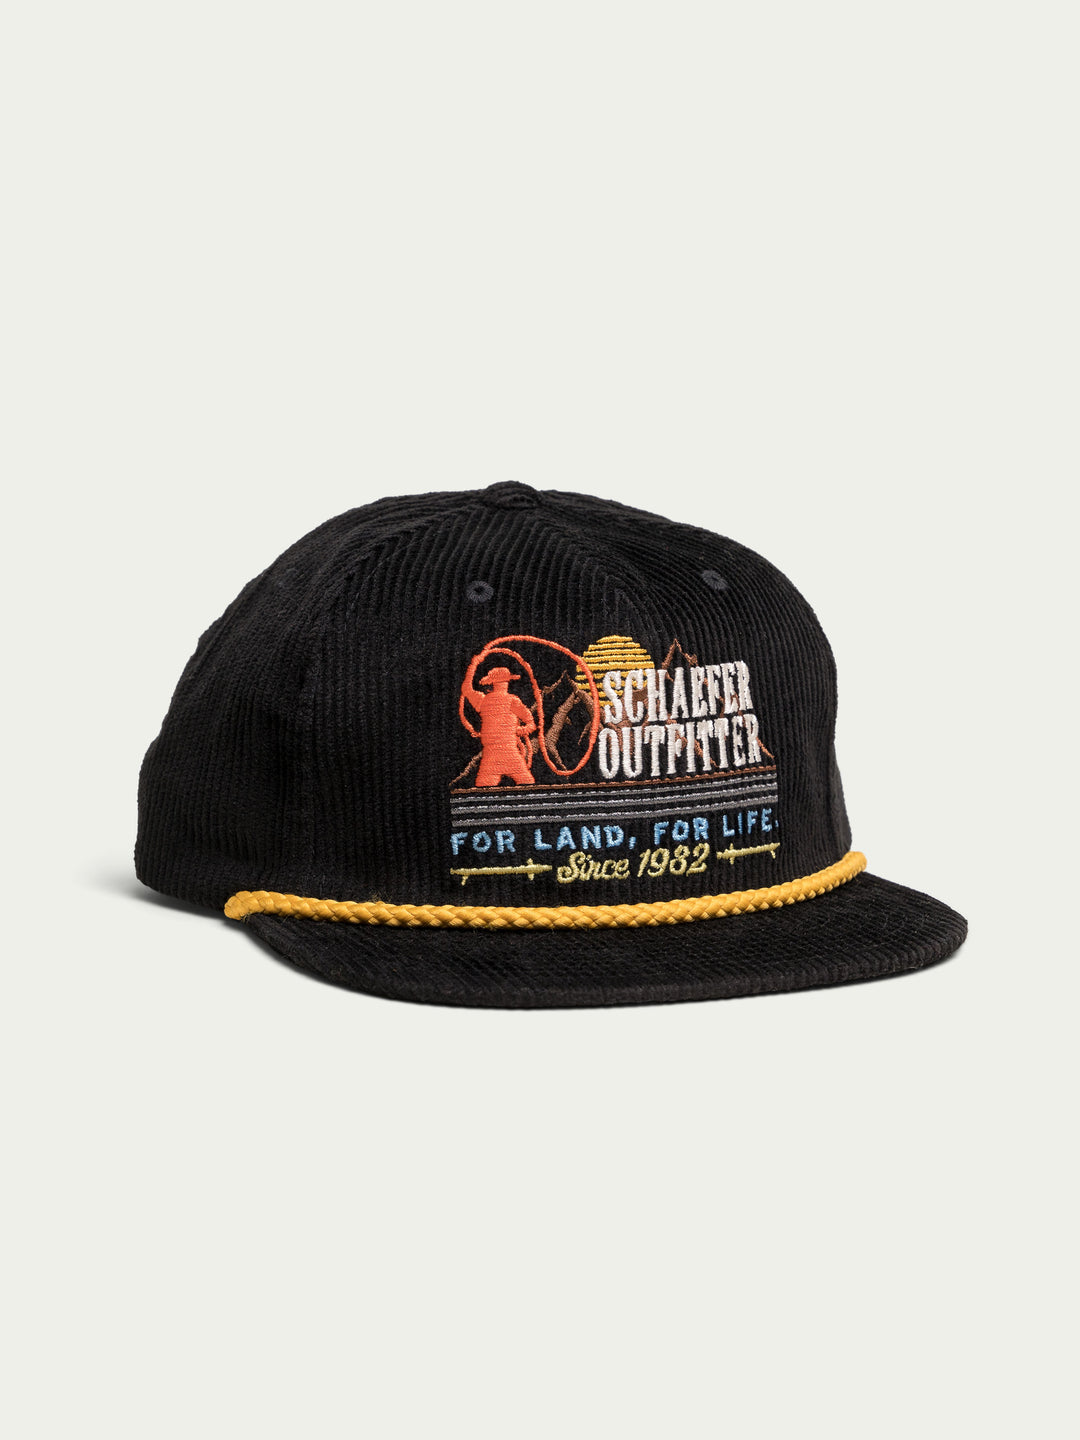 Cowboy Country Corduroy Trucker - Schaefer Outfitter